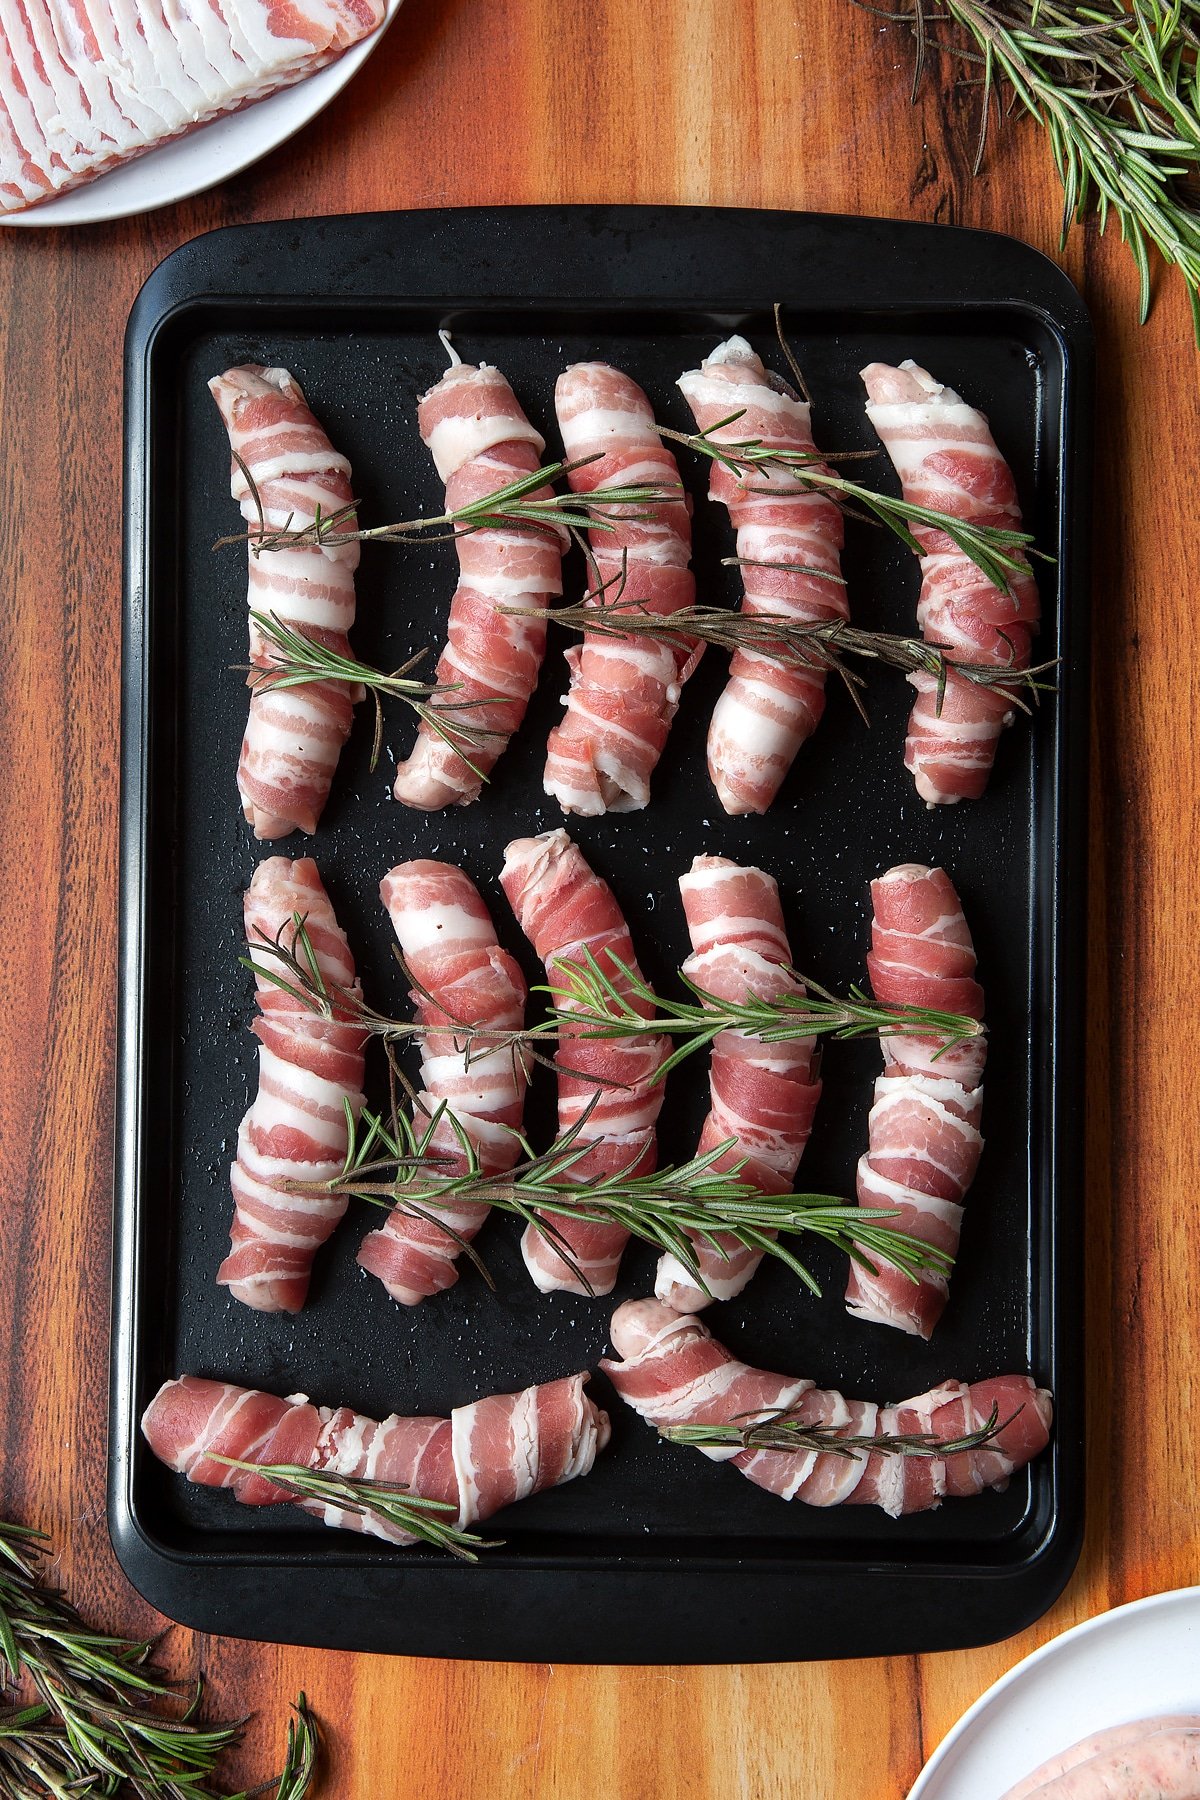 Overhead shot of bacon-wrapped sausages with rosemary on top in a black tray